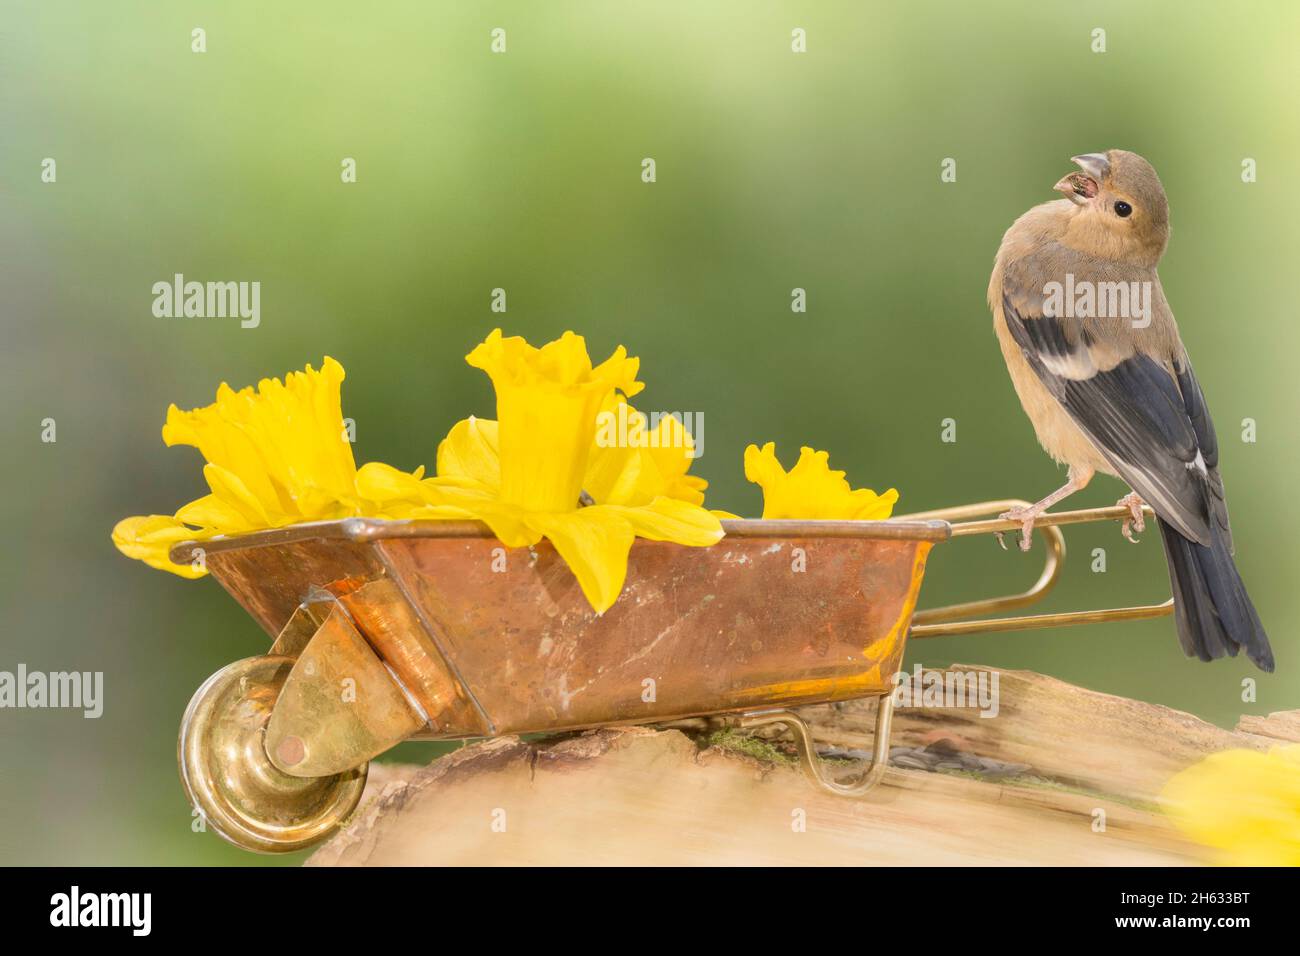 close up of young bullfinch standing on on a wheelbarrow with daffodil flowers with open mouth Stock Photo